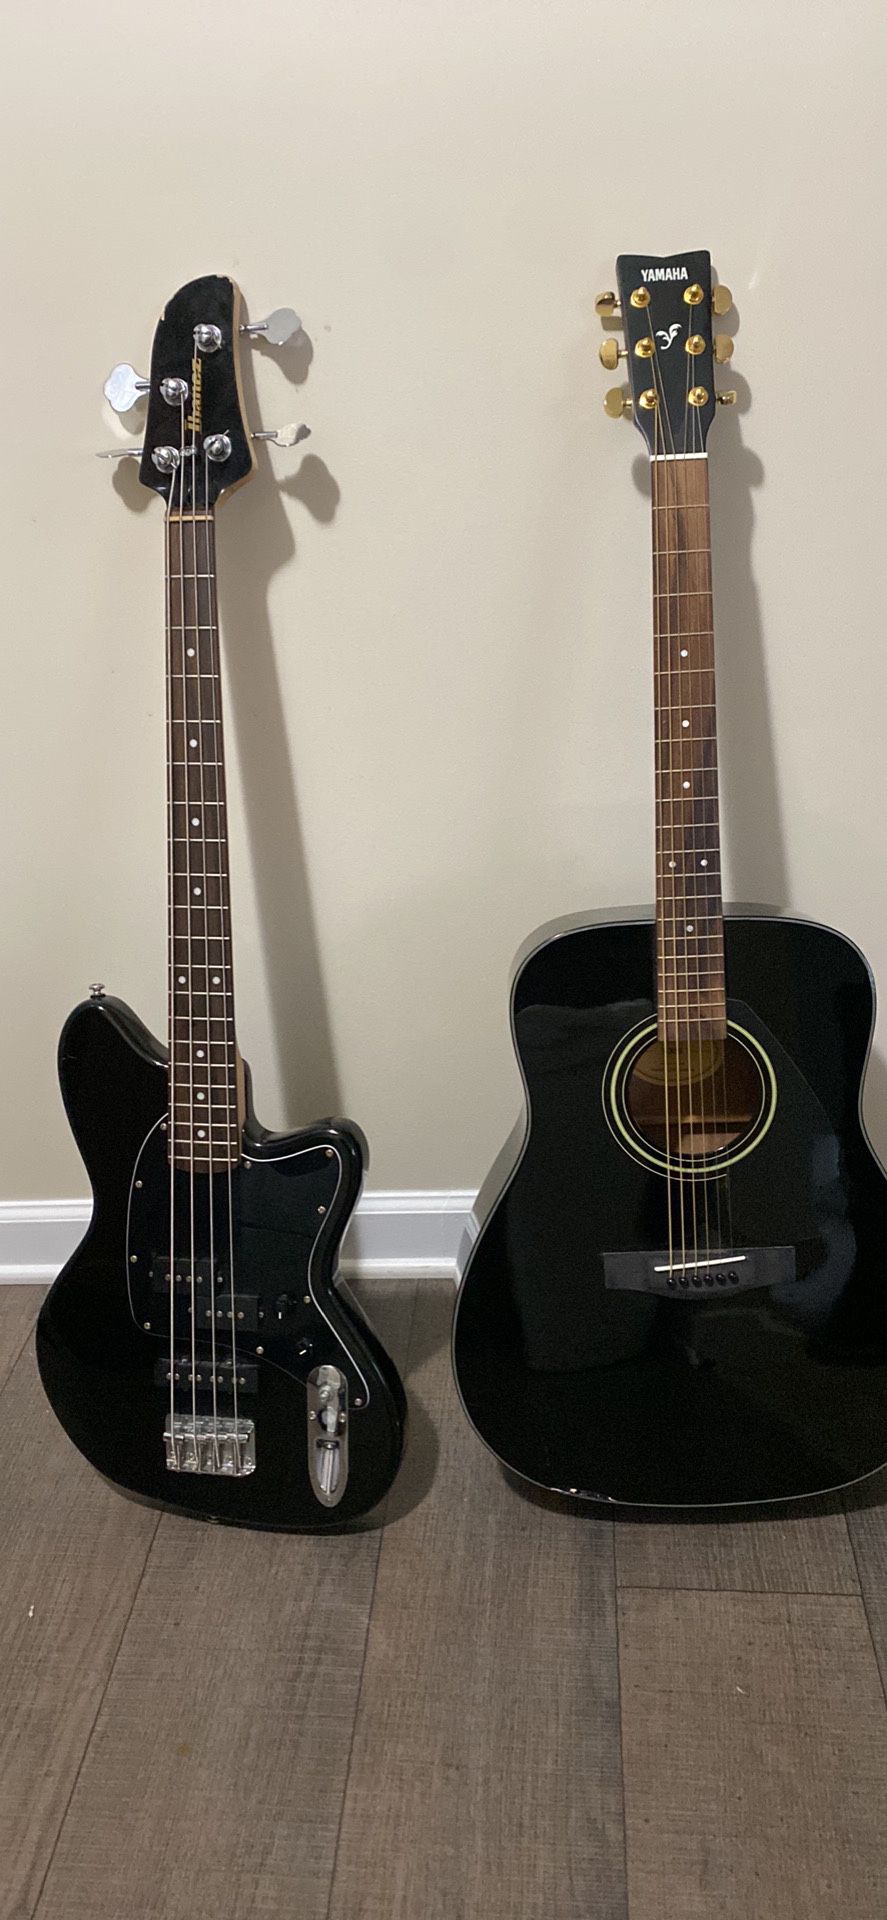 Ibanez Bass Yamaha Acoustic And Asus Tablet 